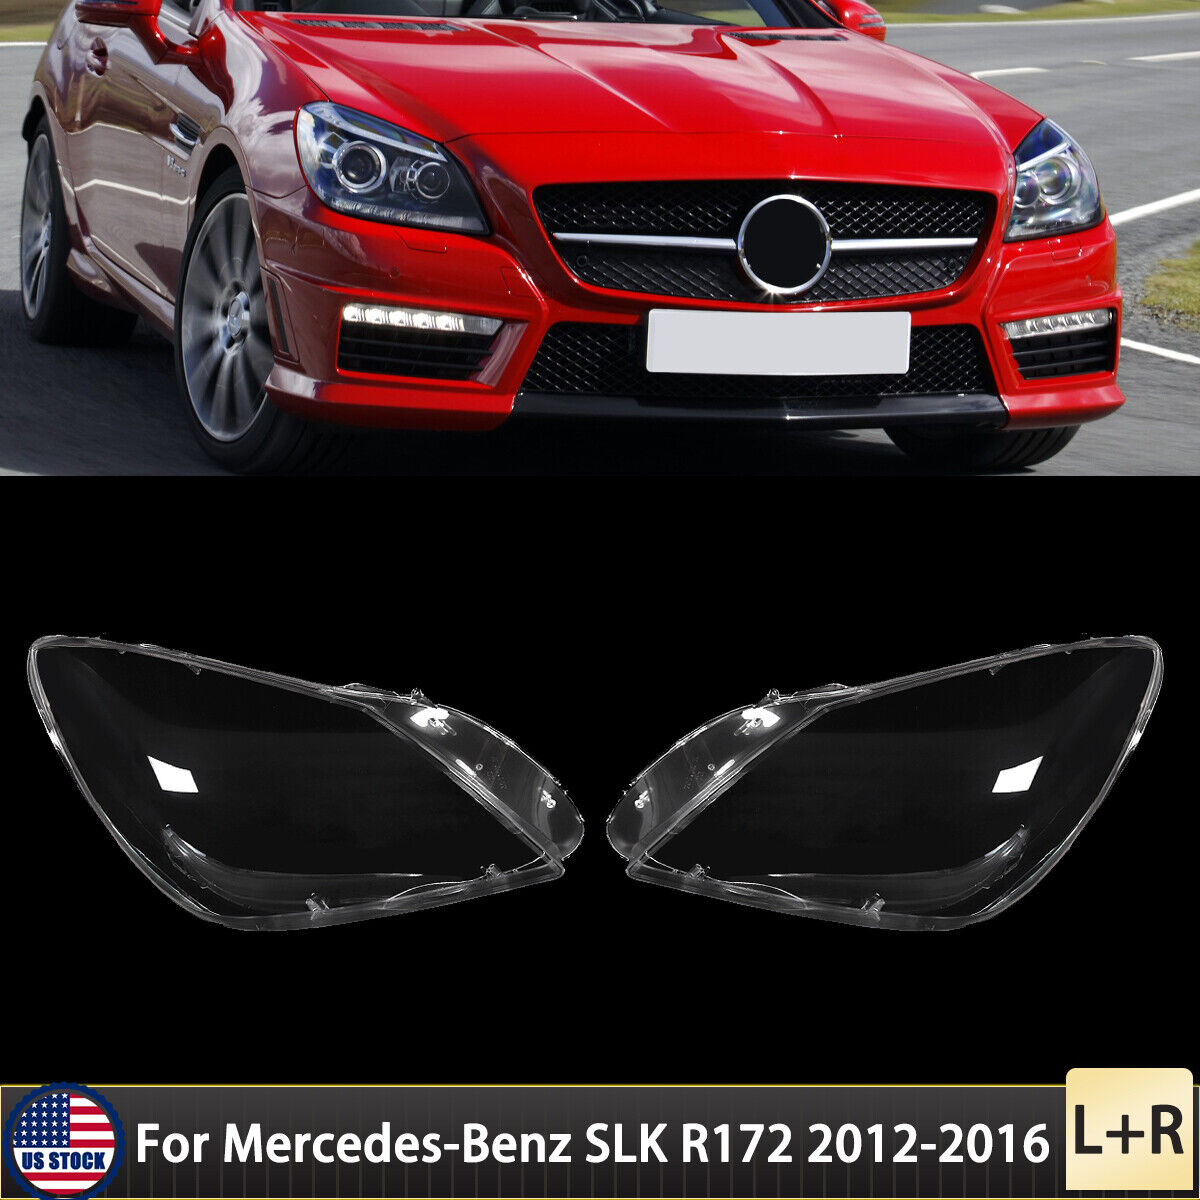 For Mercedes-Benz SLK-Class R172 2012-2016 Pair Headlight Lens Cover Replacement